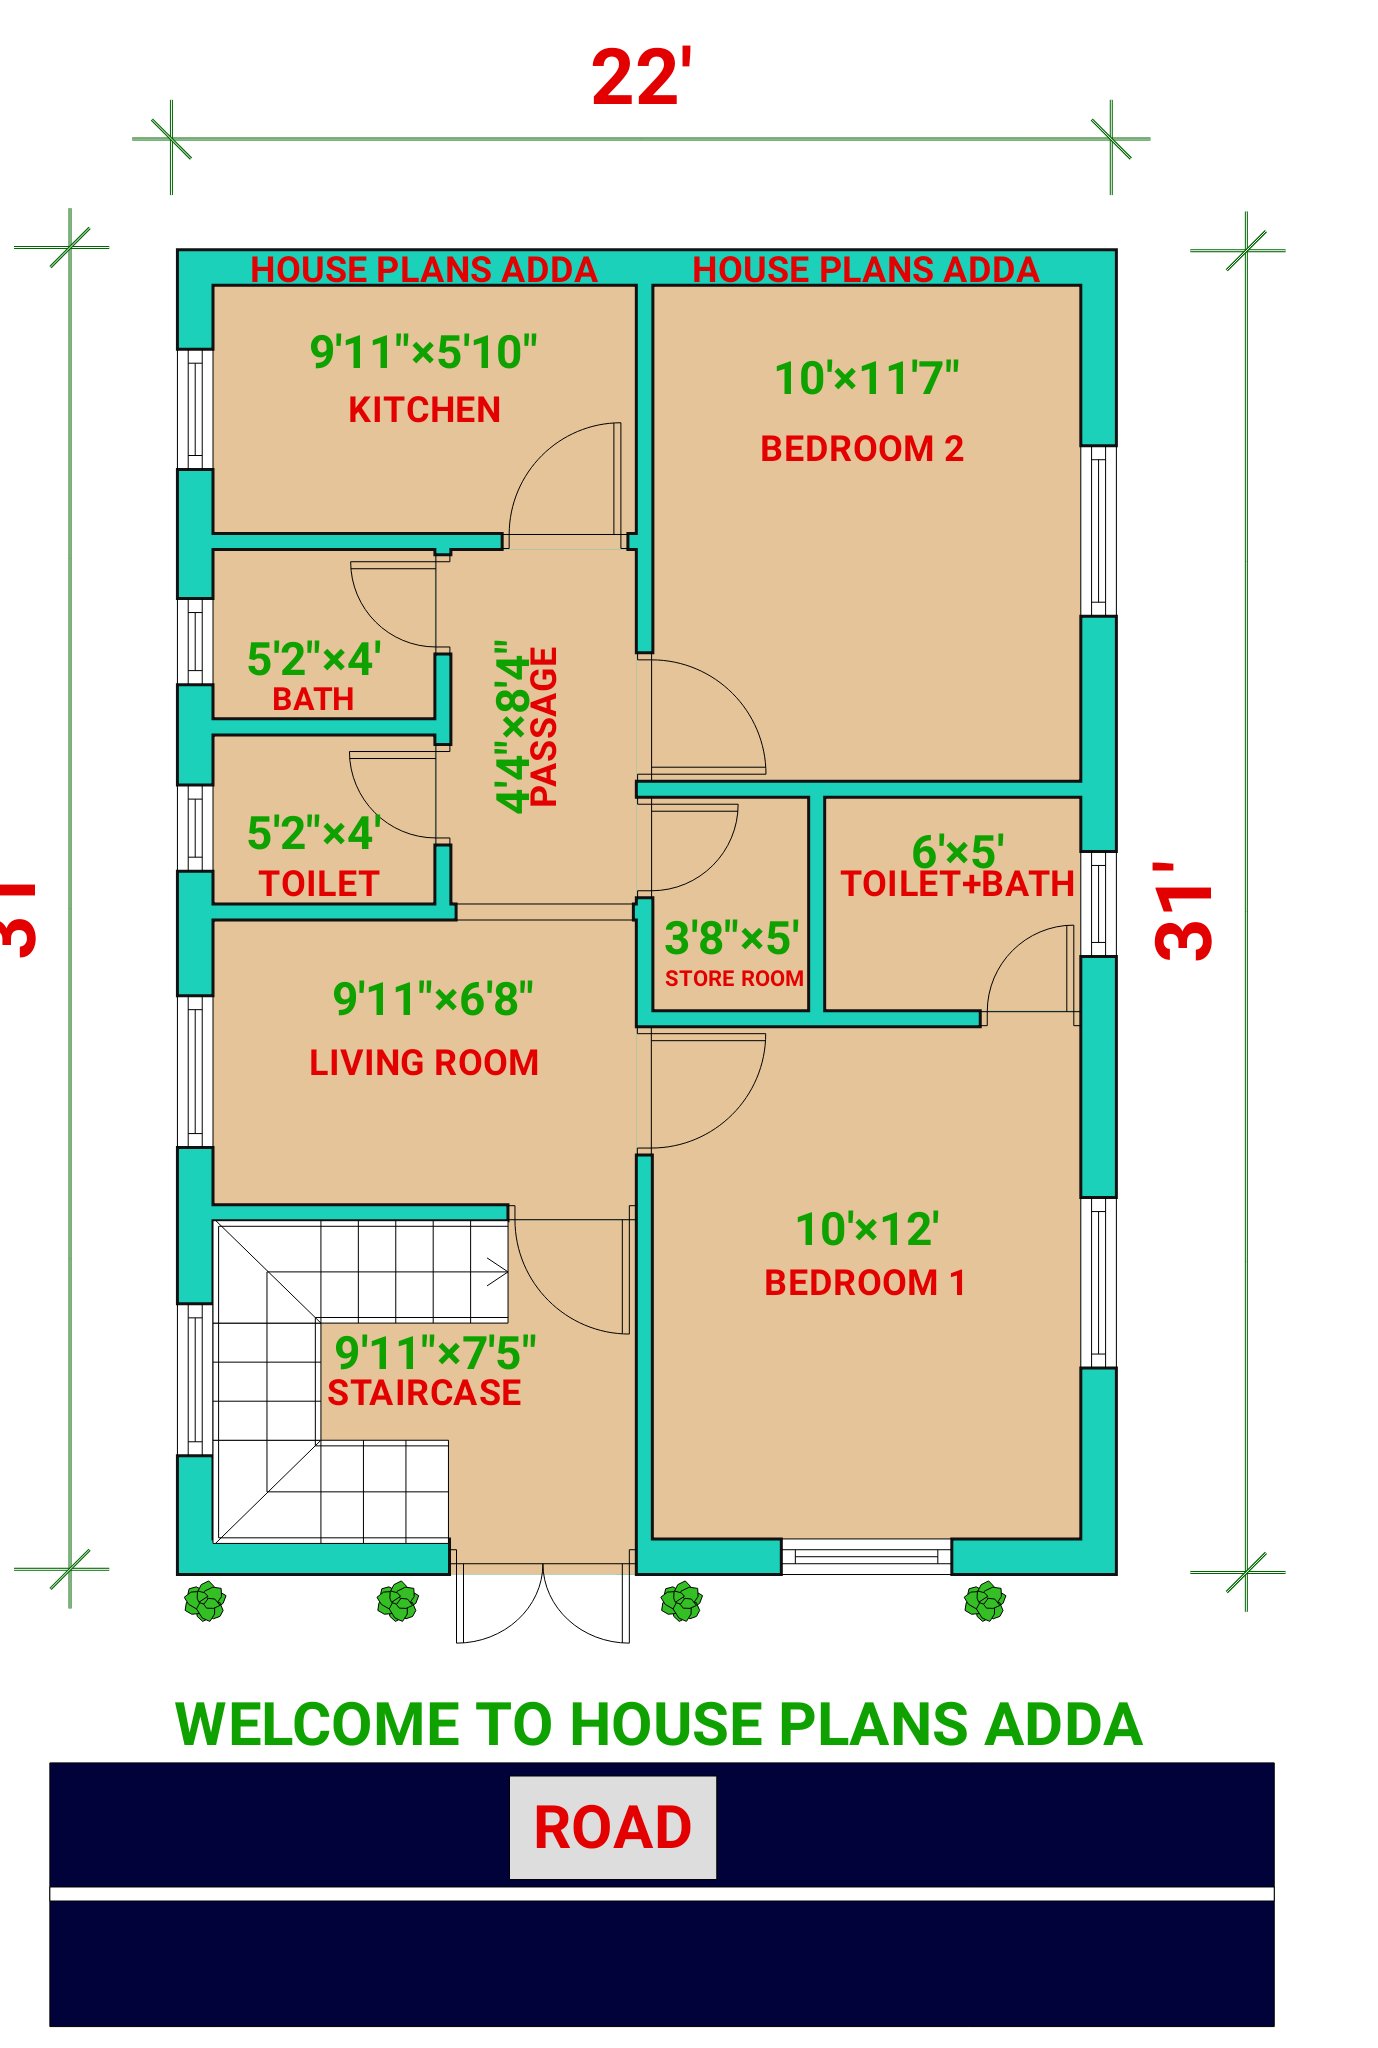 Small house plan